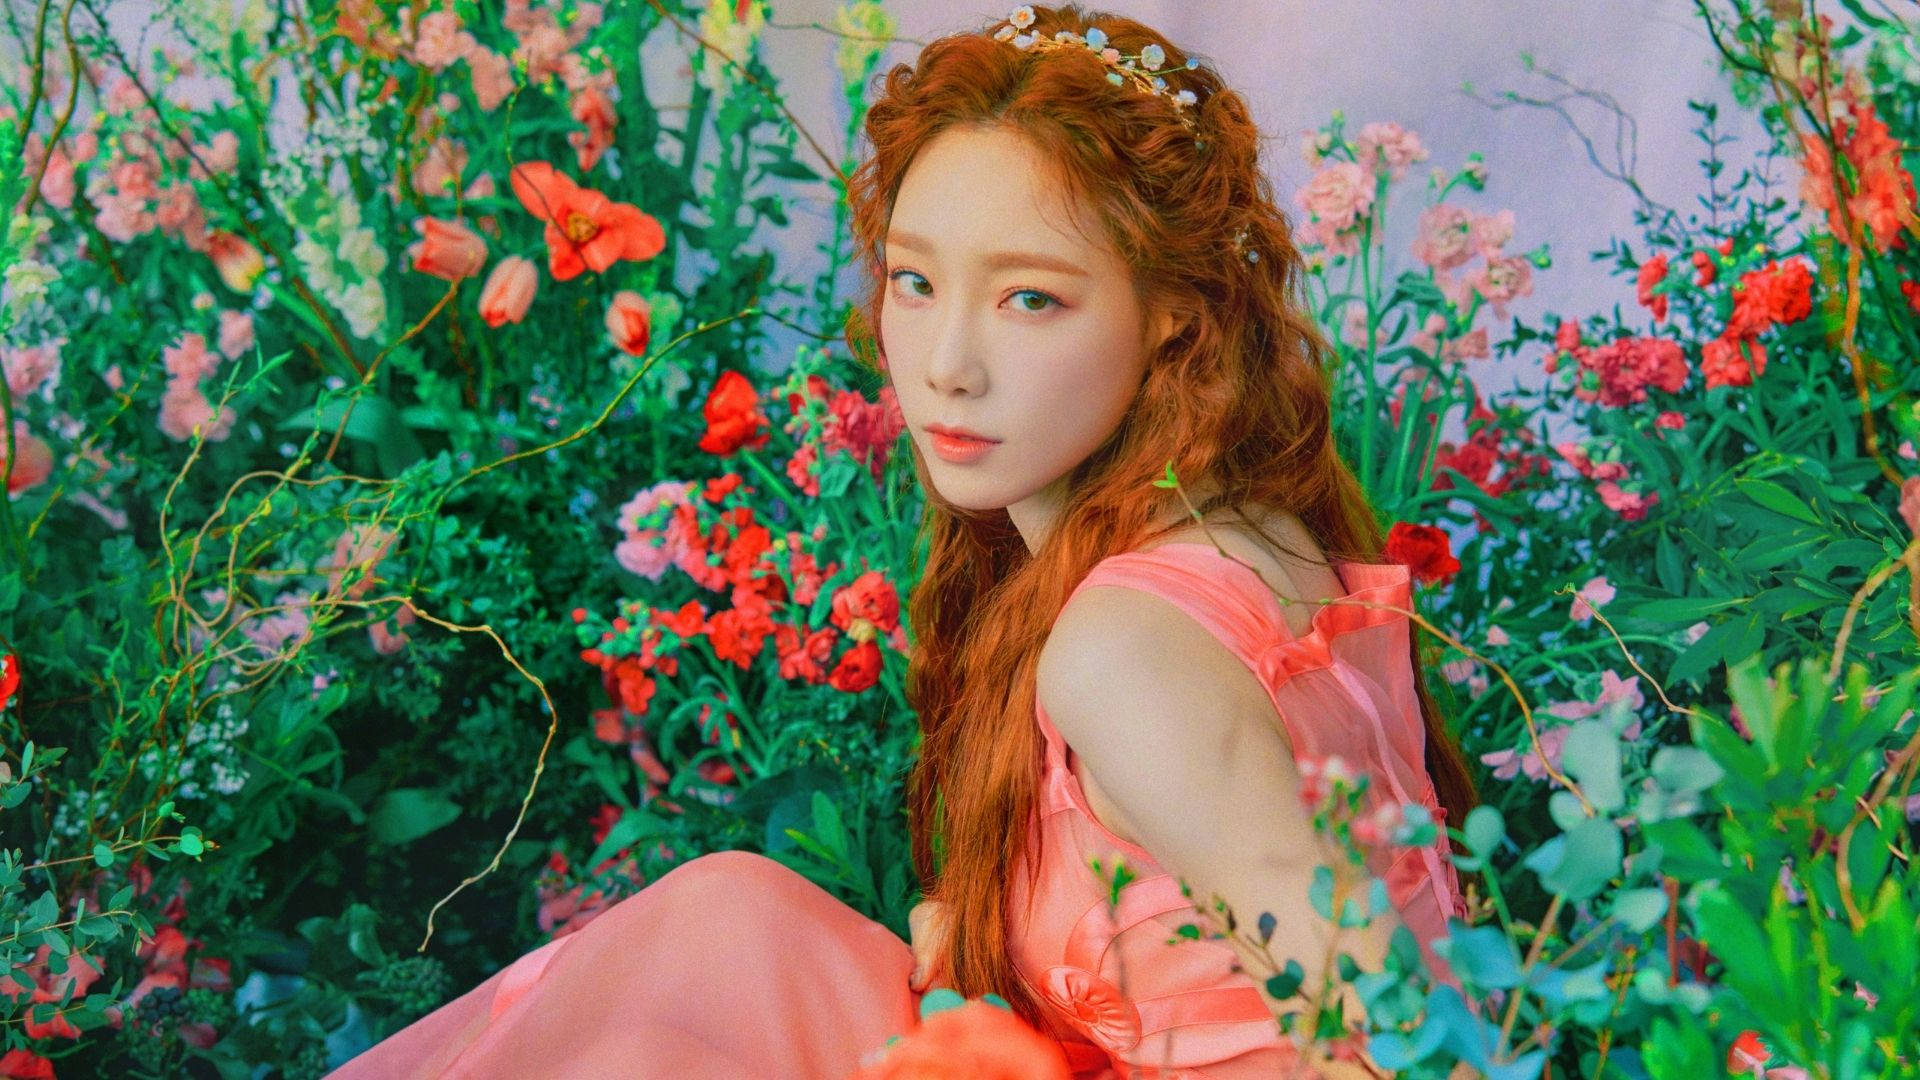 Taeyeon With Flowers Background